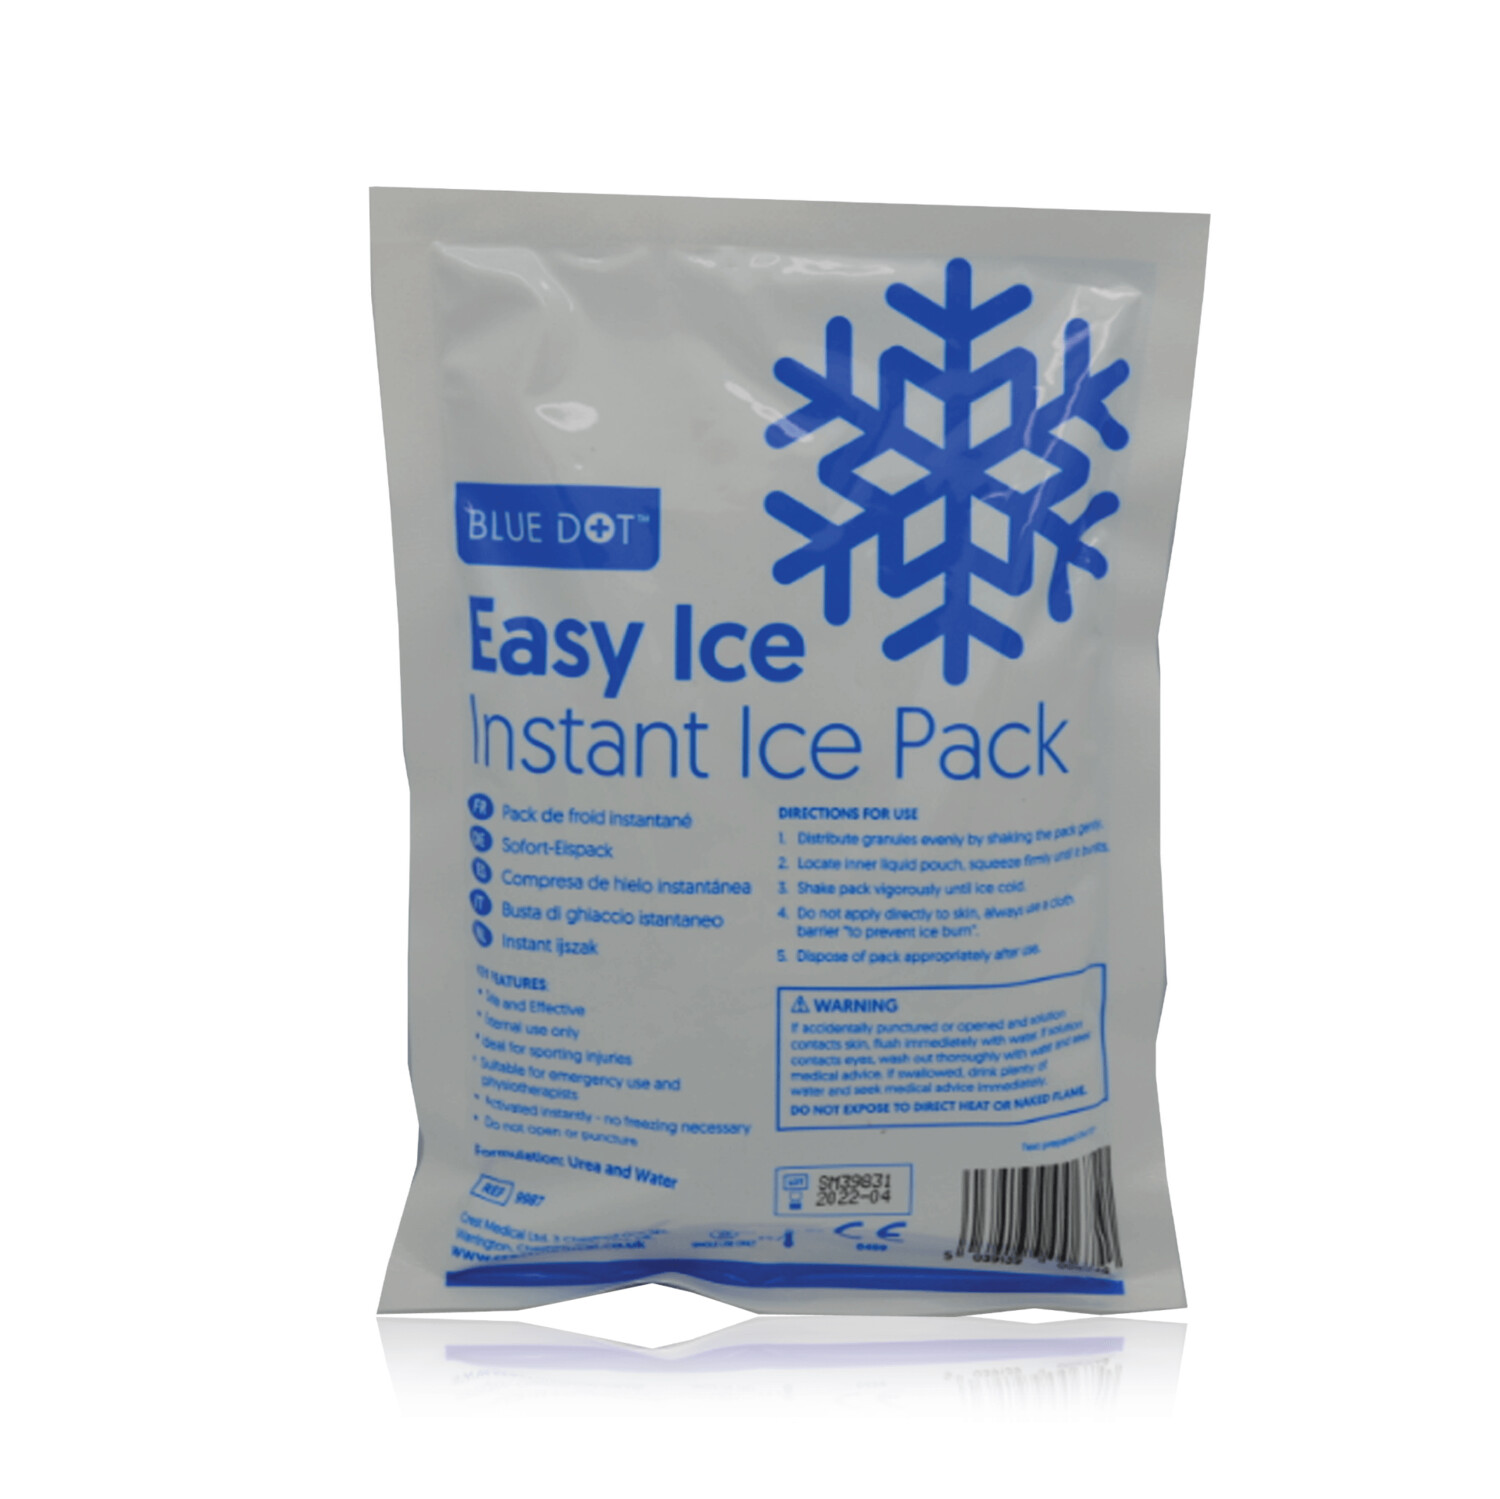 small blue ice packs